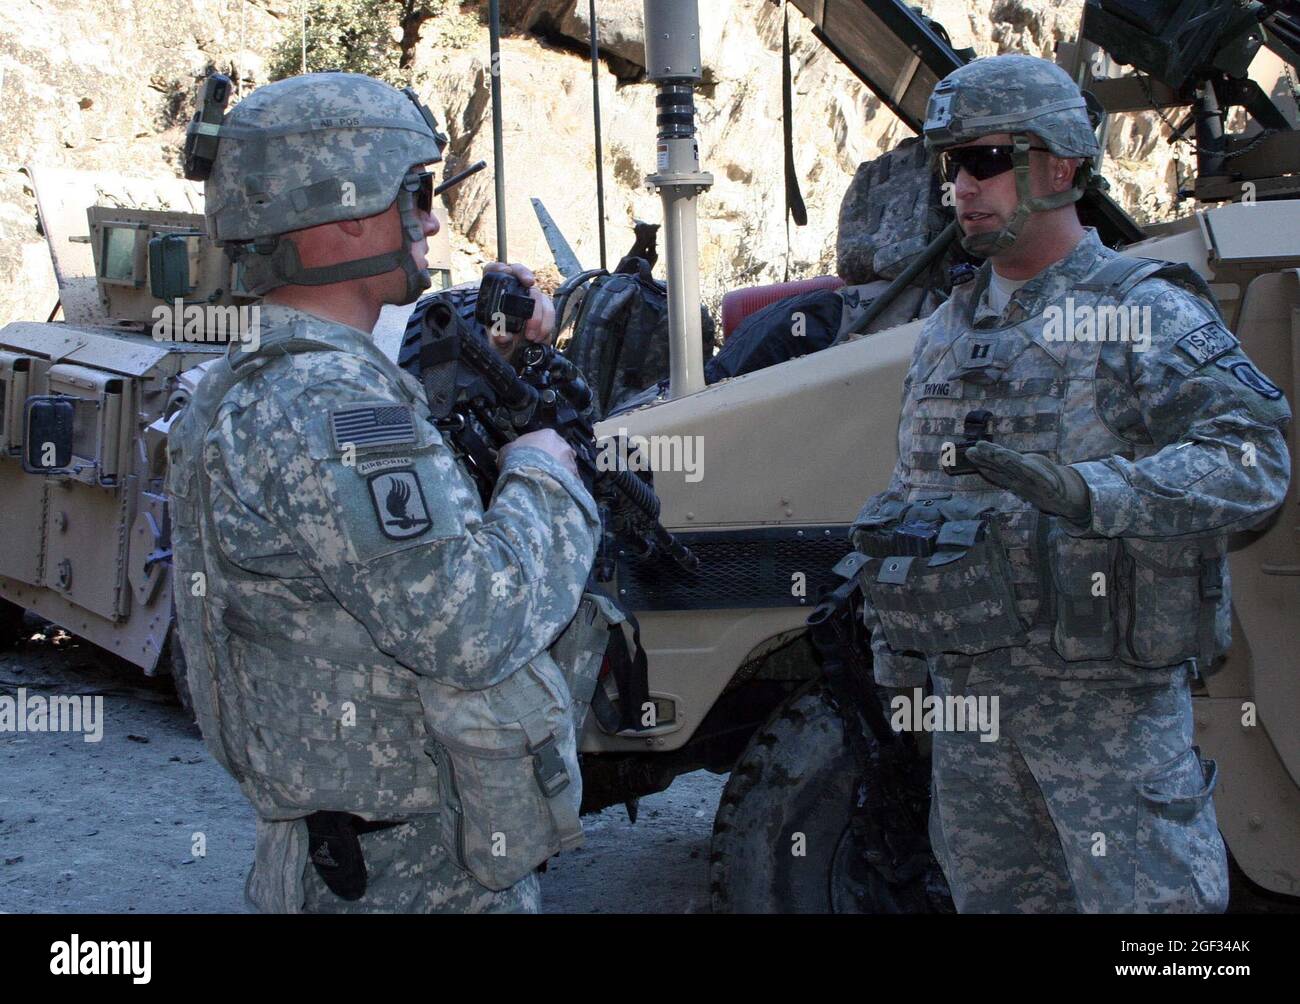 U.S. Army Capt. John Thyng discusses a vehicle recovery operation with 1st Lt. Adam Van Lear on a road in the Kunar province of Afghanistan, Jan. 23. Stock Photo